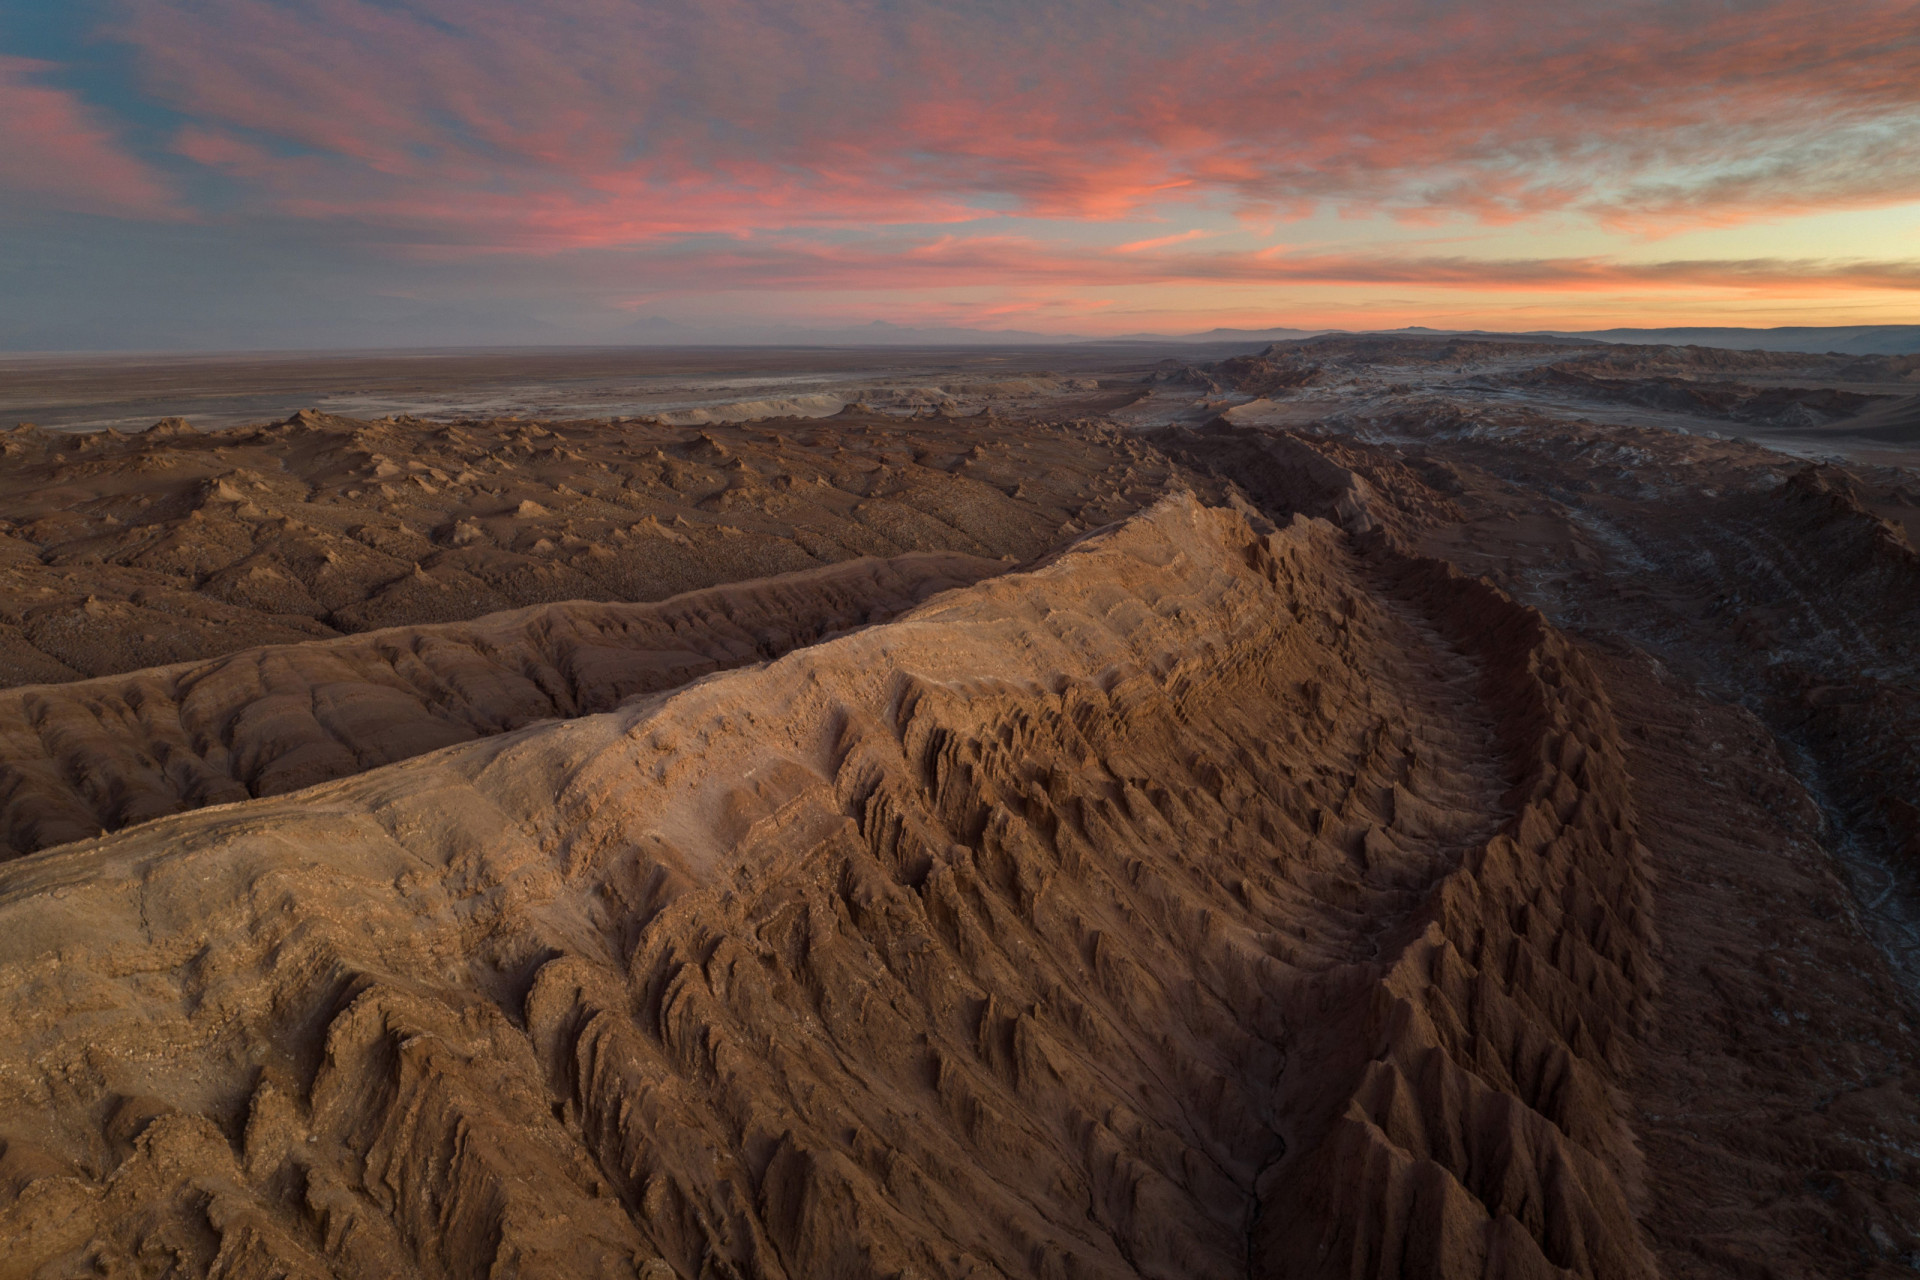 <p>Moving on to the Americas, Chile’s Atacama Desert offers a dry oasis for travelers who find themselves drawn to the beauty of such a hostile environment. The Desierto Florido National Park is a safeguard for the region’s flora, which have adapted to some of the world’s harshest conditions.</p><p><a href="https://www.msn.com/en-us/community/channel/vid-7xx8mnucu55yw63we9va2gwr7uihbxwc68fxqp25x6tg4ftibpra?cvid=94631541bc0f4f89bfd59158d696ad7e">Follow us and access great exclusive content every day</a></p>